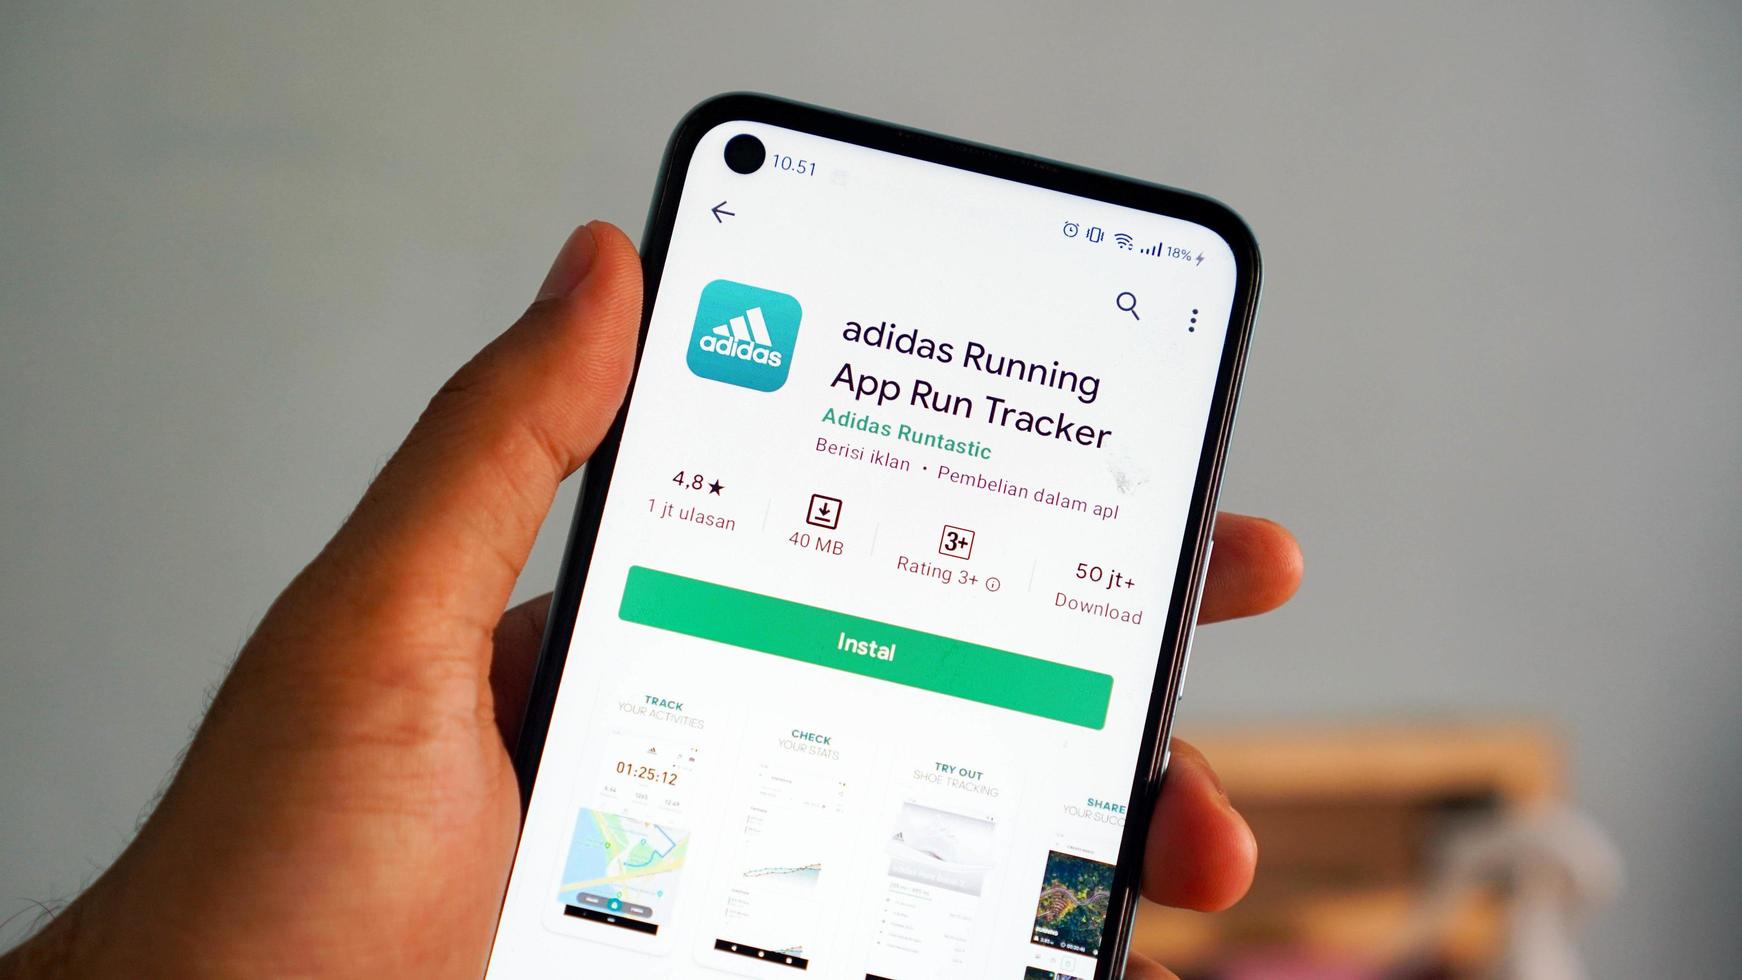 Pekanbaru, Indonesia 2021 - Adidas running. app run tracker android app. The app icon in the mobile screen close up is held by hand. photo